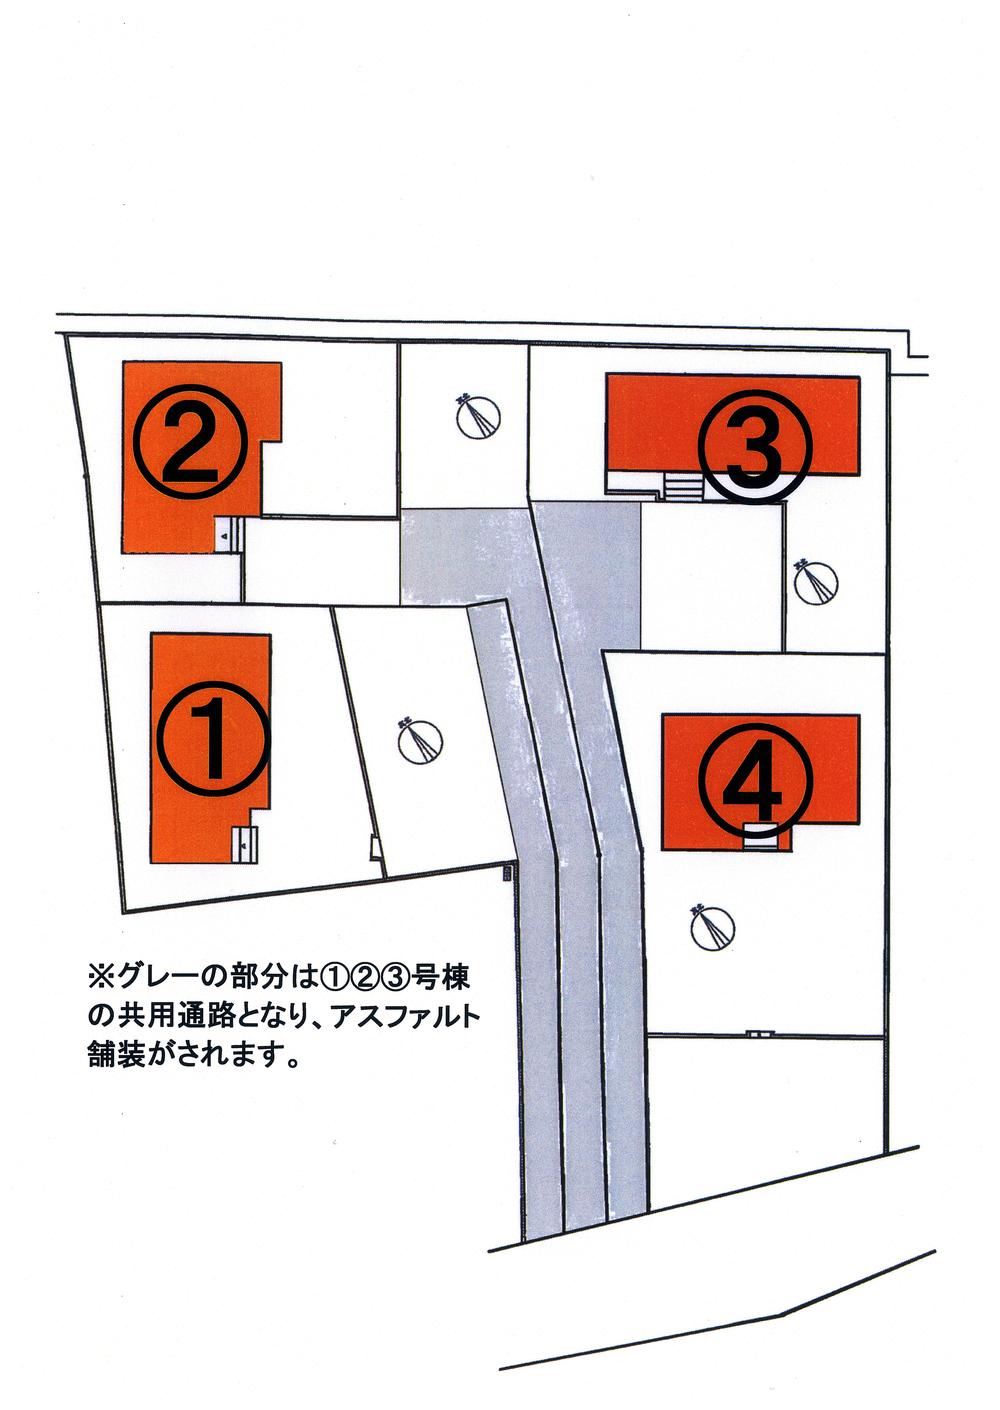 The entire compartment Figure. 1 Building 19,800,000 yen Building 2 19,800,000 yen 3 Building 18,800,000 yen 4 Building 20.8 million yen (all sections including tax)